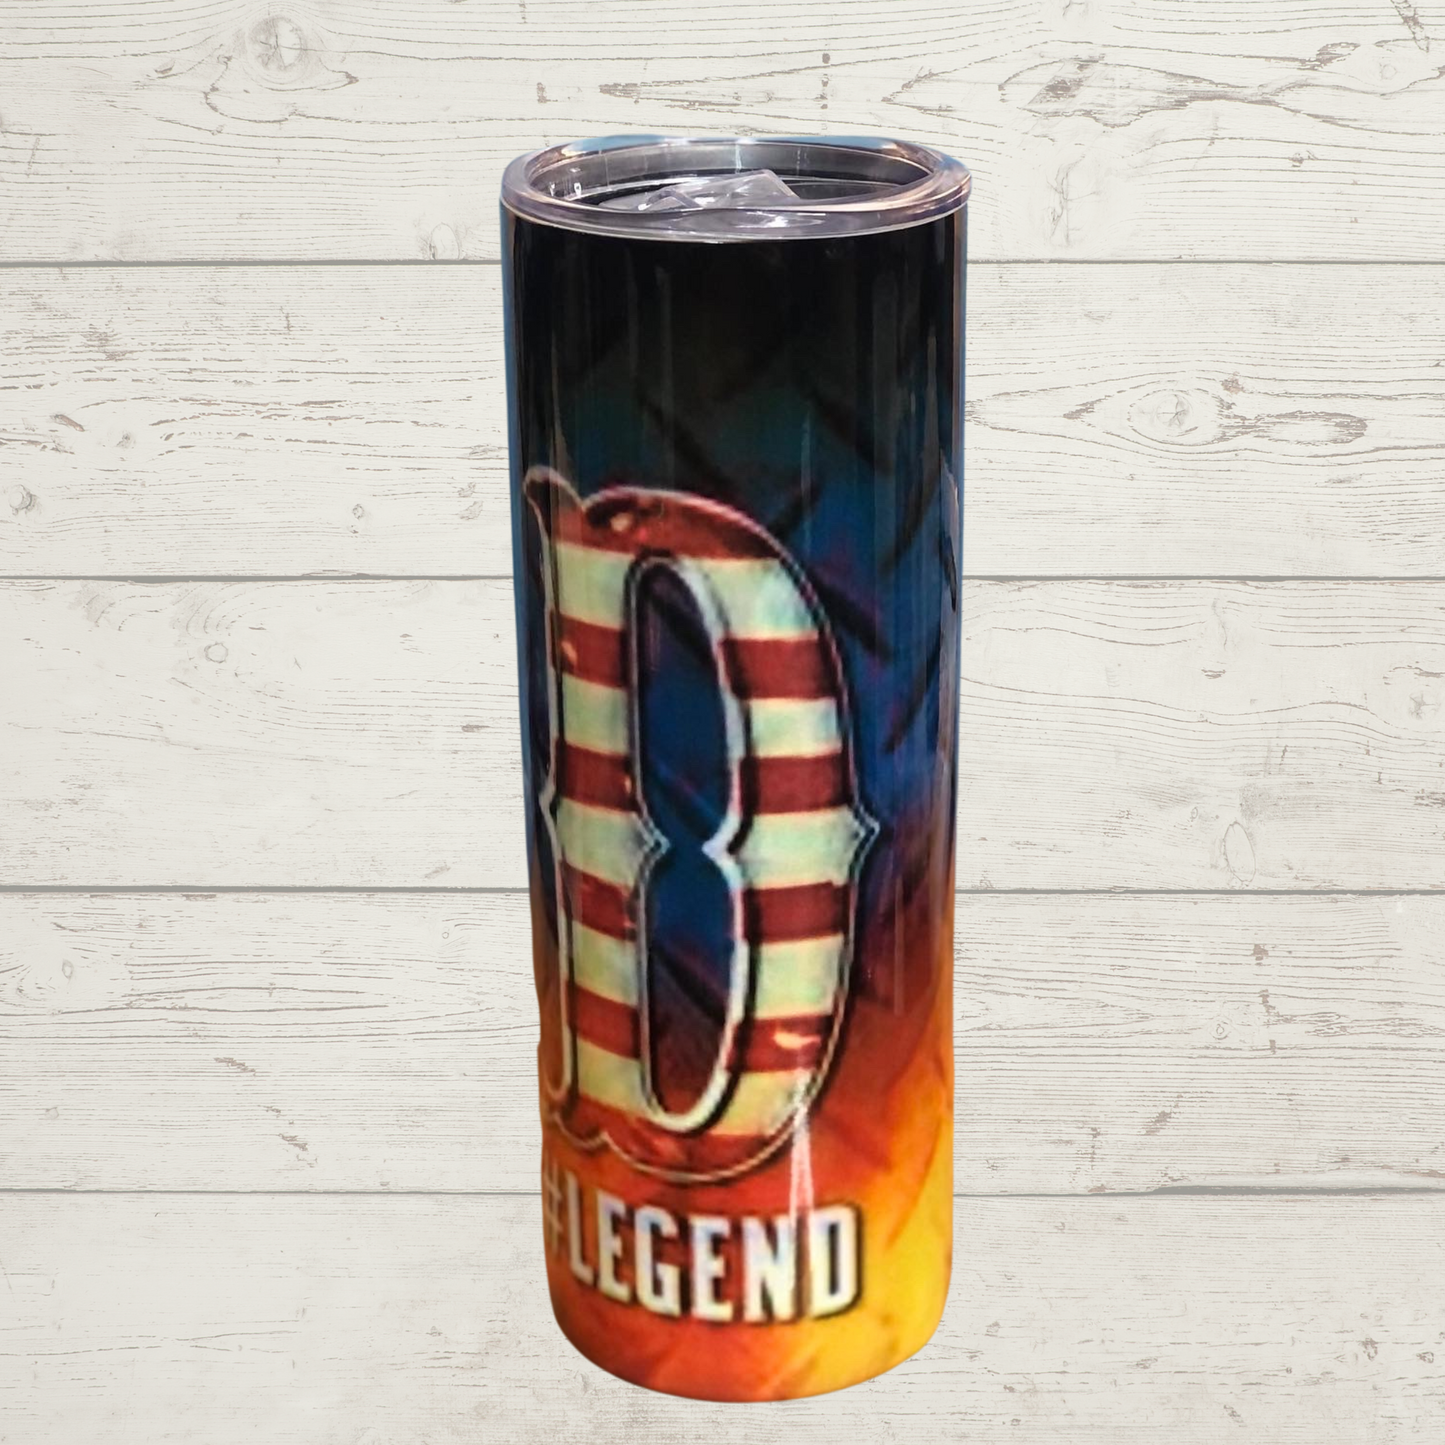 DAD #MANMYTHLEGEND 20 oz Sublimation Skinny Tumbler Black Blue and Orange Background with American Flag Red White and Blue D A D # Man Myth Legend High Defintion Quality Images on Quality Tumblers